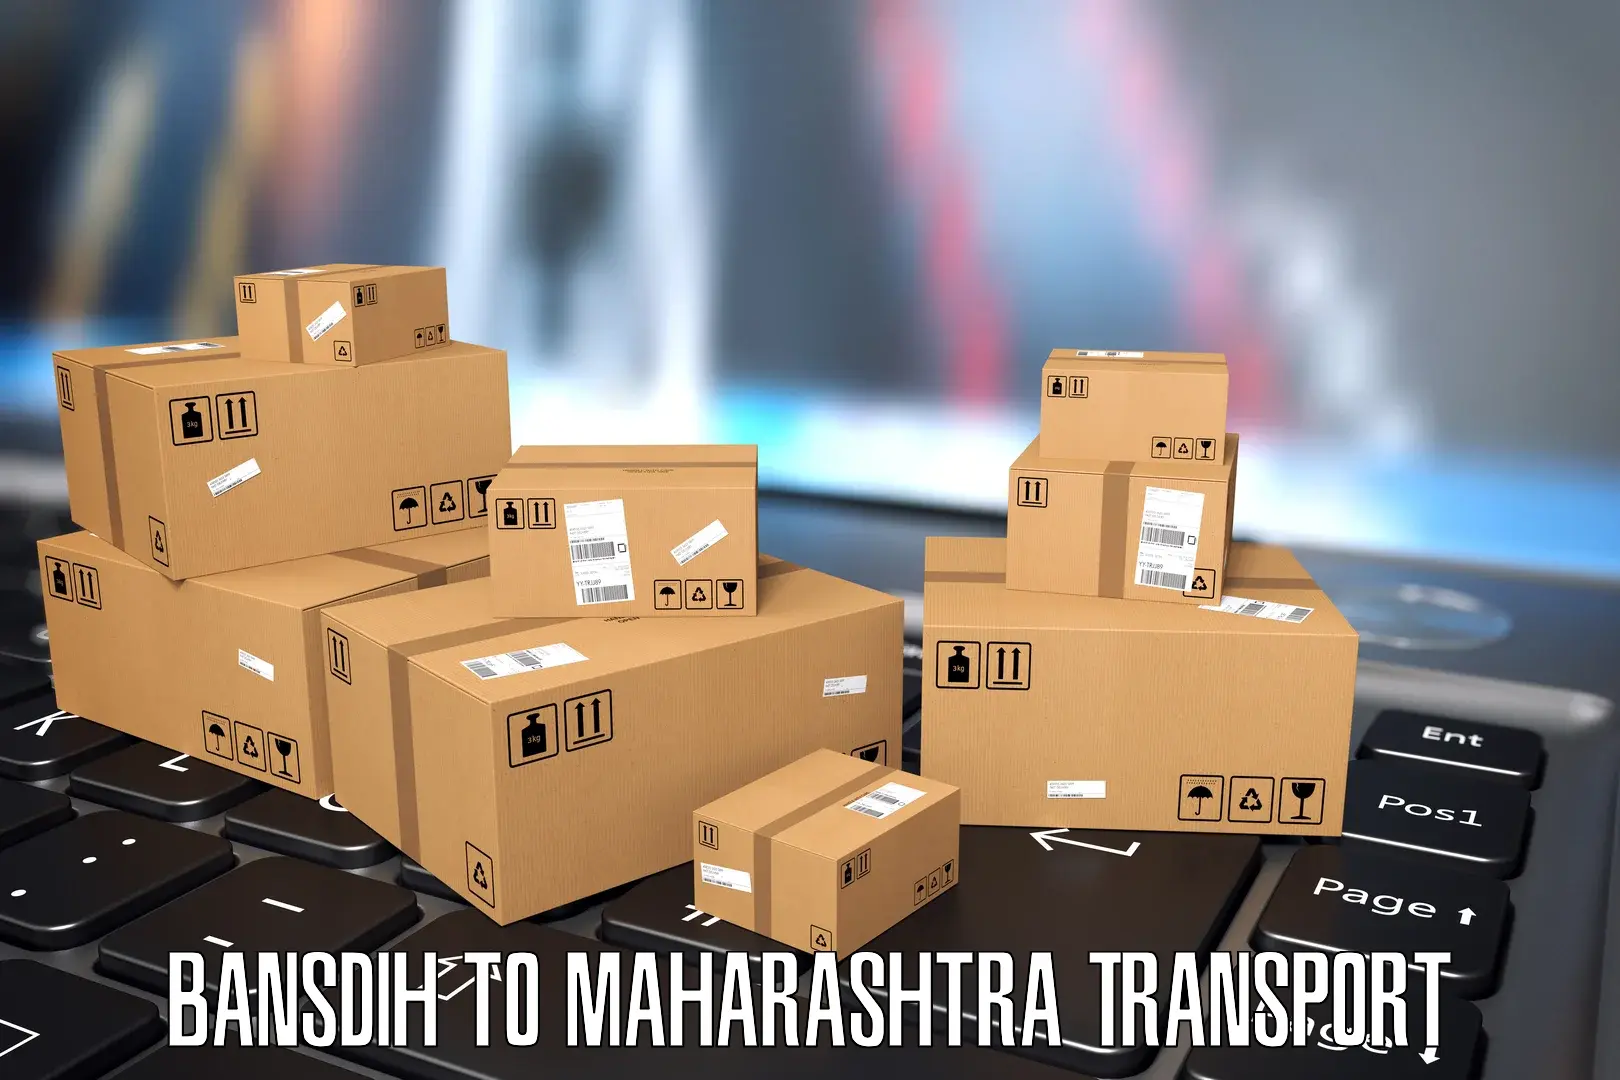 Truck transport companies in India in Bansdih to Bhandara